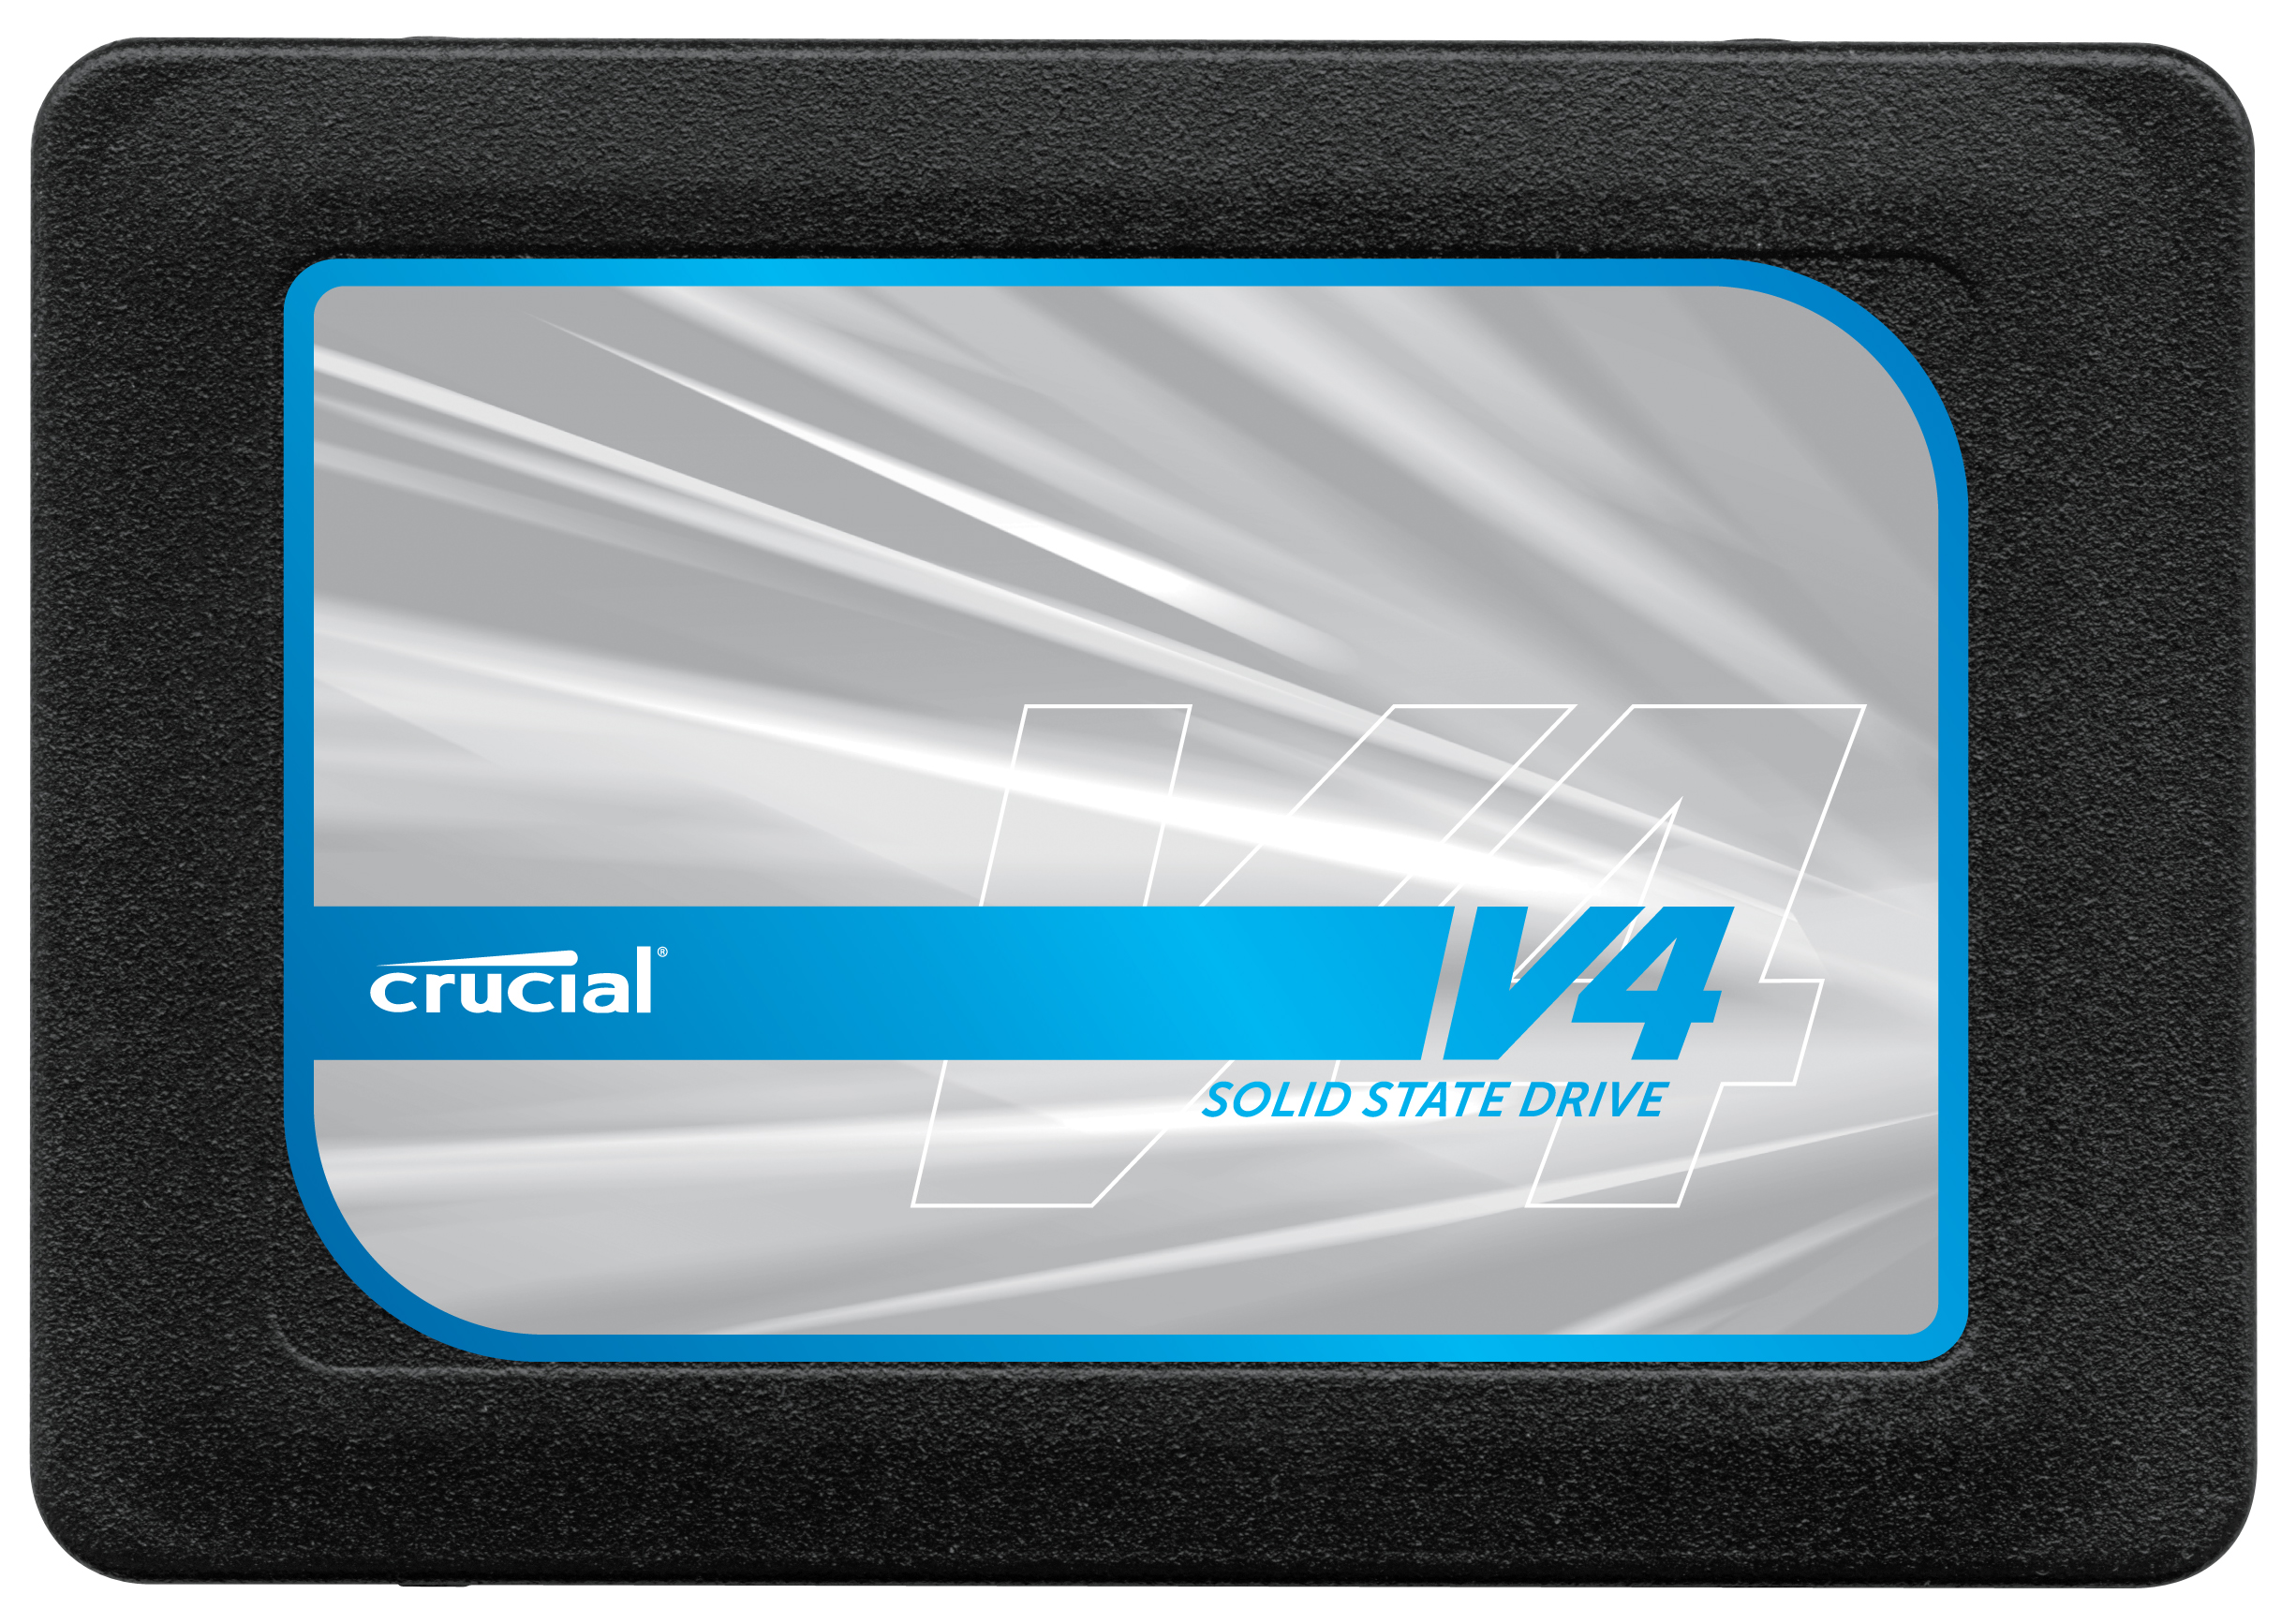 CT128V4SSD2BAA Crucial V4 Series 128GB MLC SATA 3Gbps 2.5-inch Internal Solid State Drive (SSD) with 3.5-inch Adapter Kit